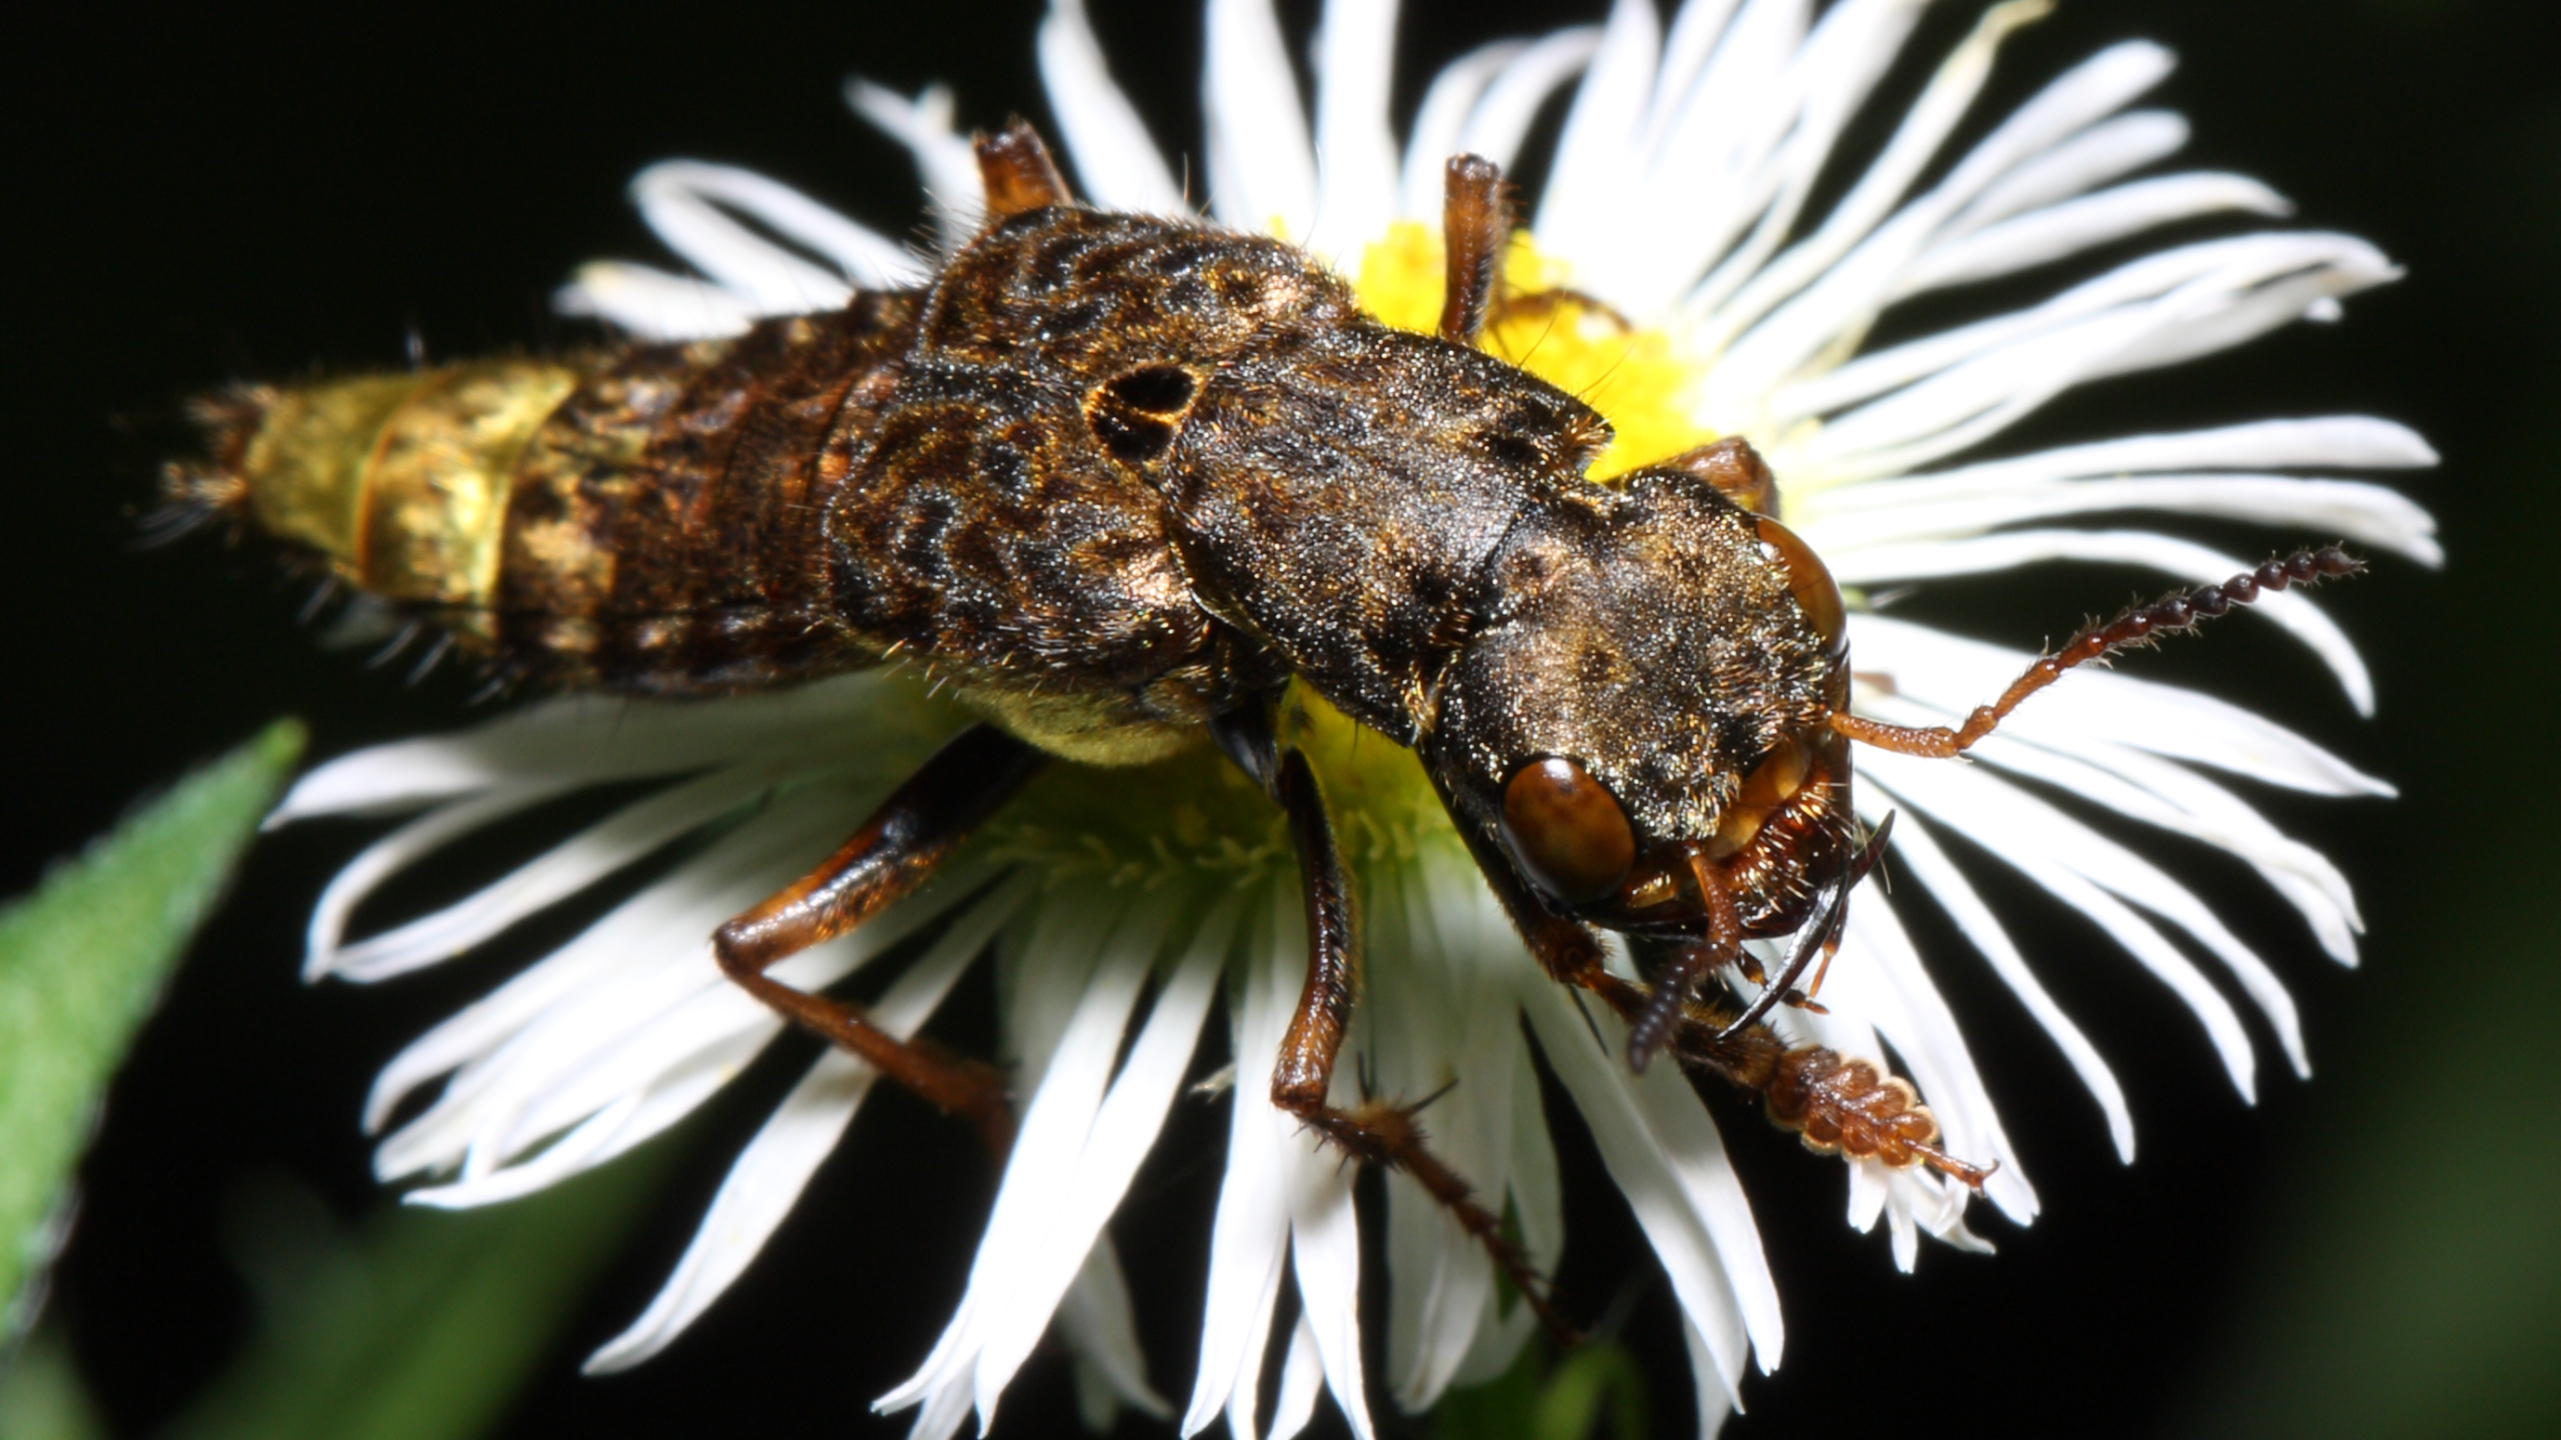 extreme close up color photograph of Gold and Brown Rove Beetle on daisy fleabane blossom dorso lateral view